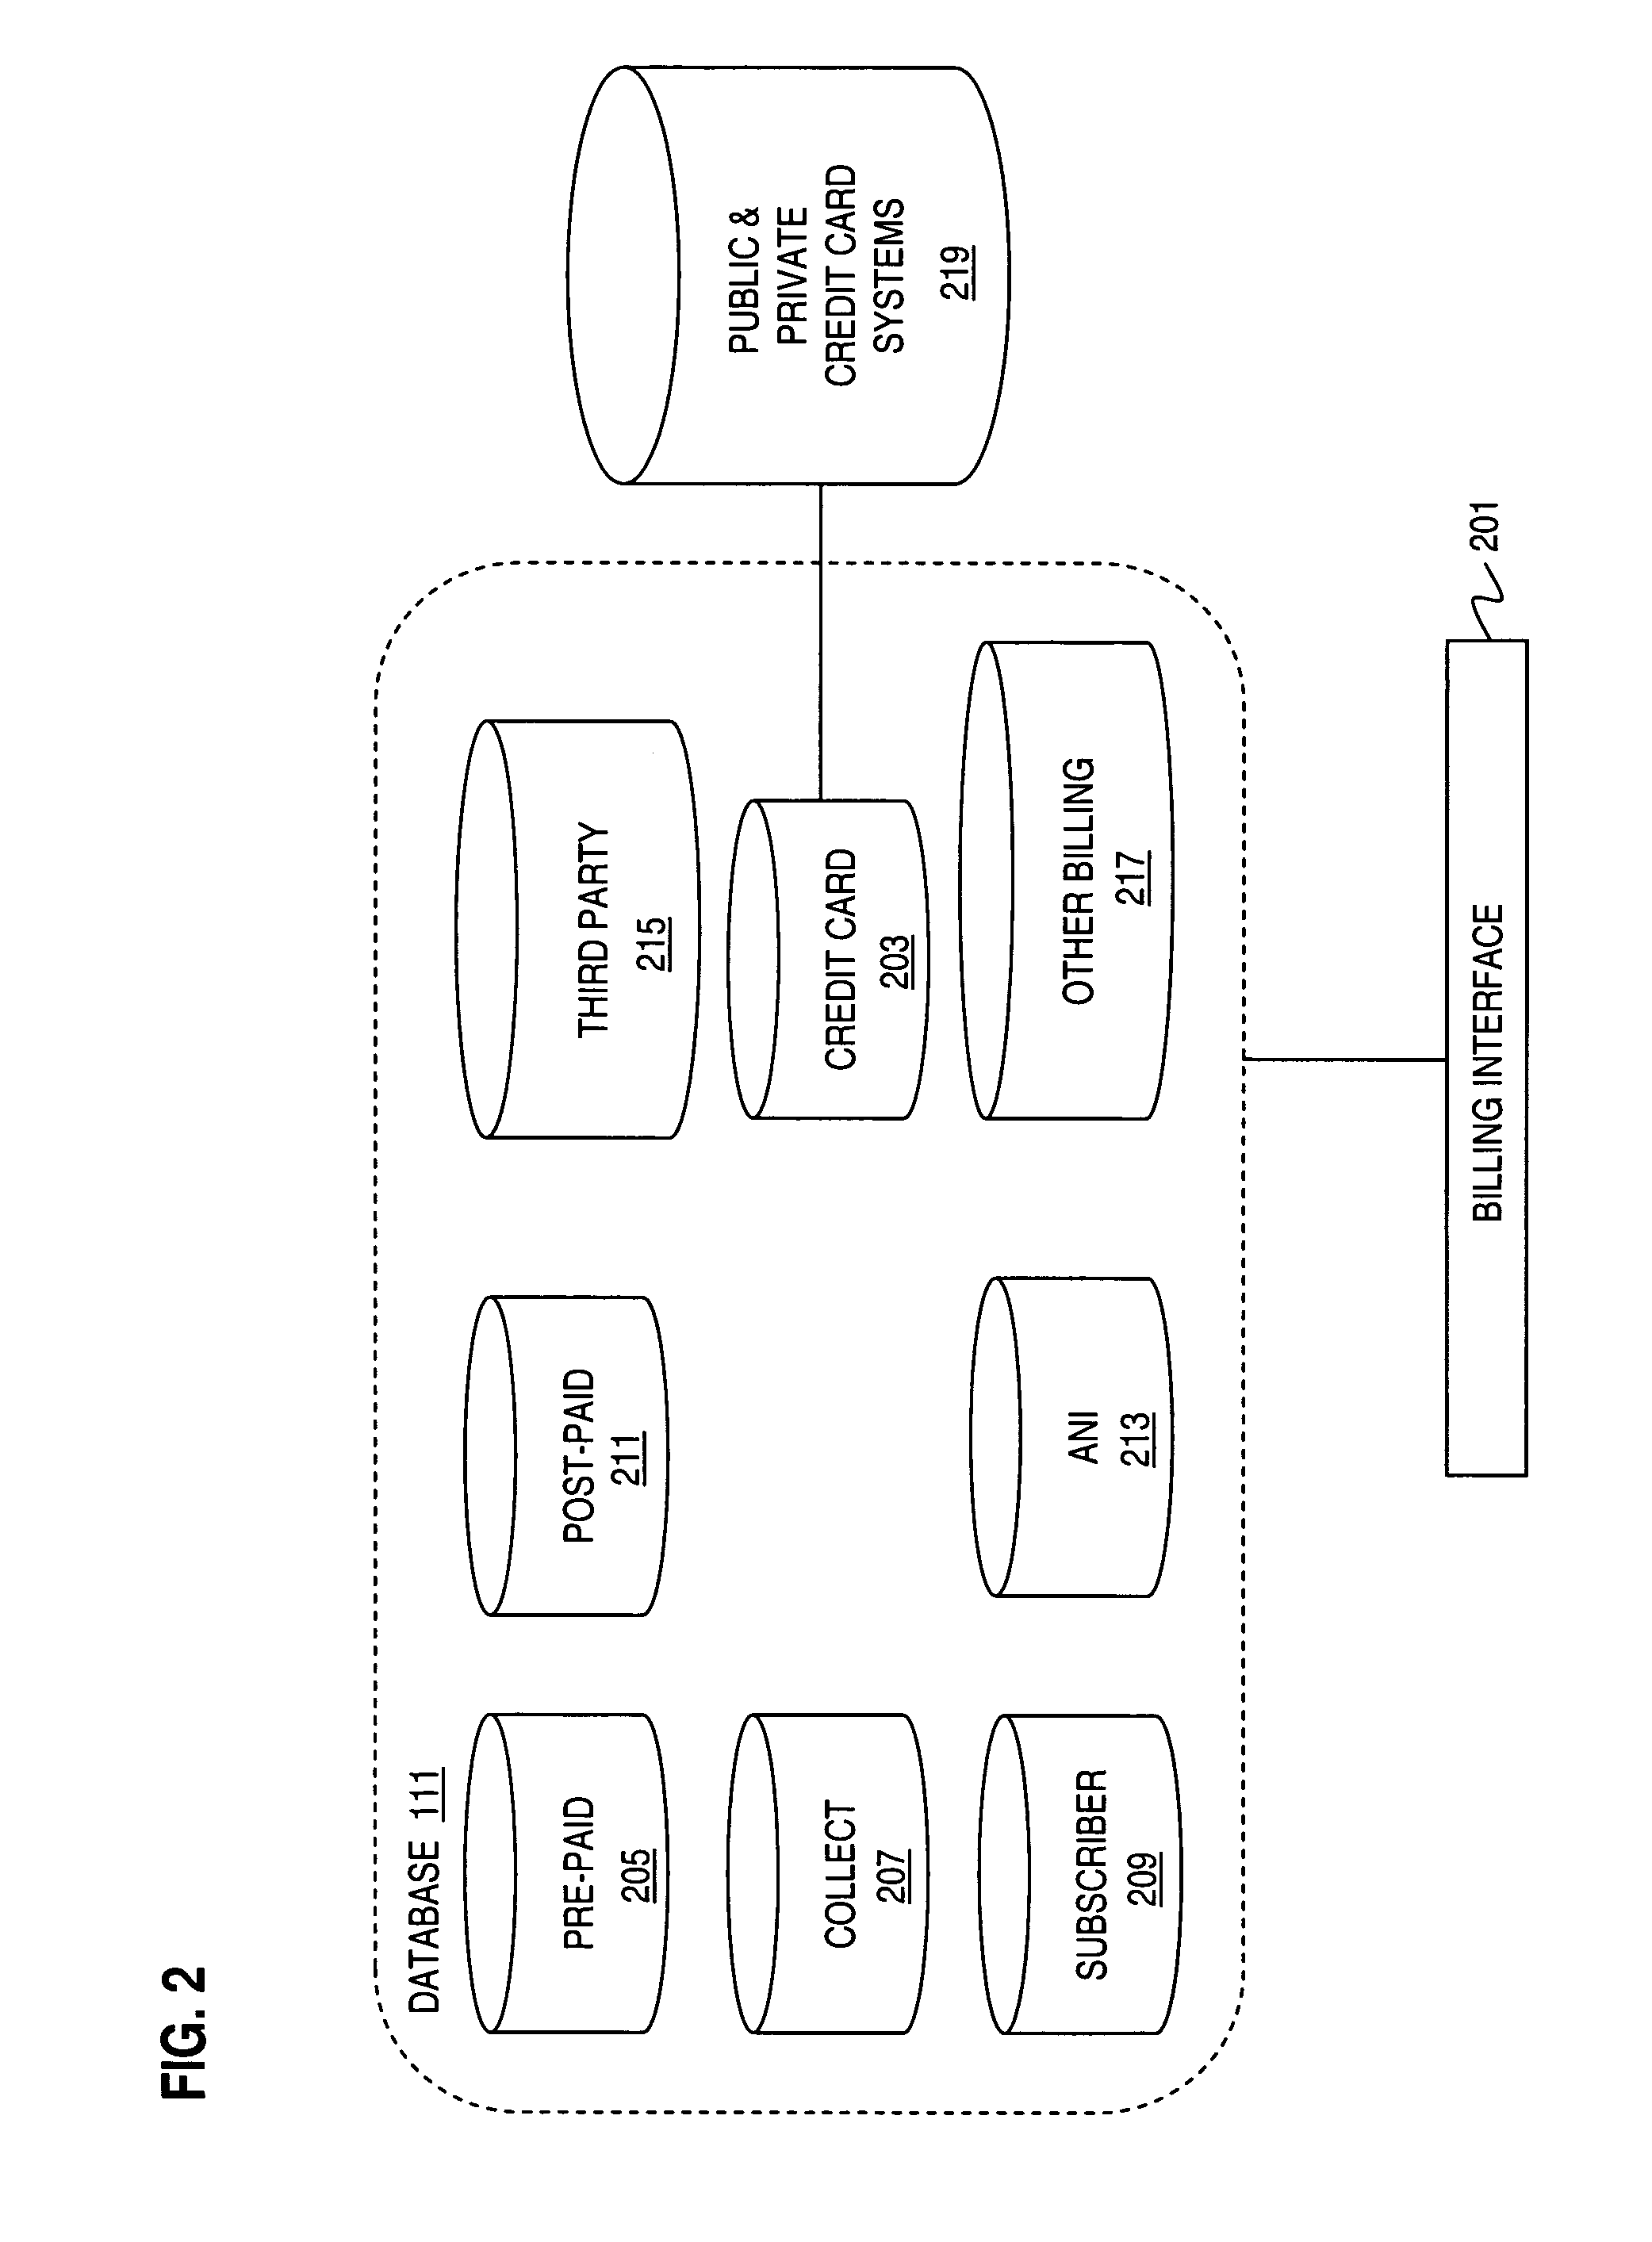 Method and system for providing conferencing services